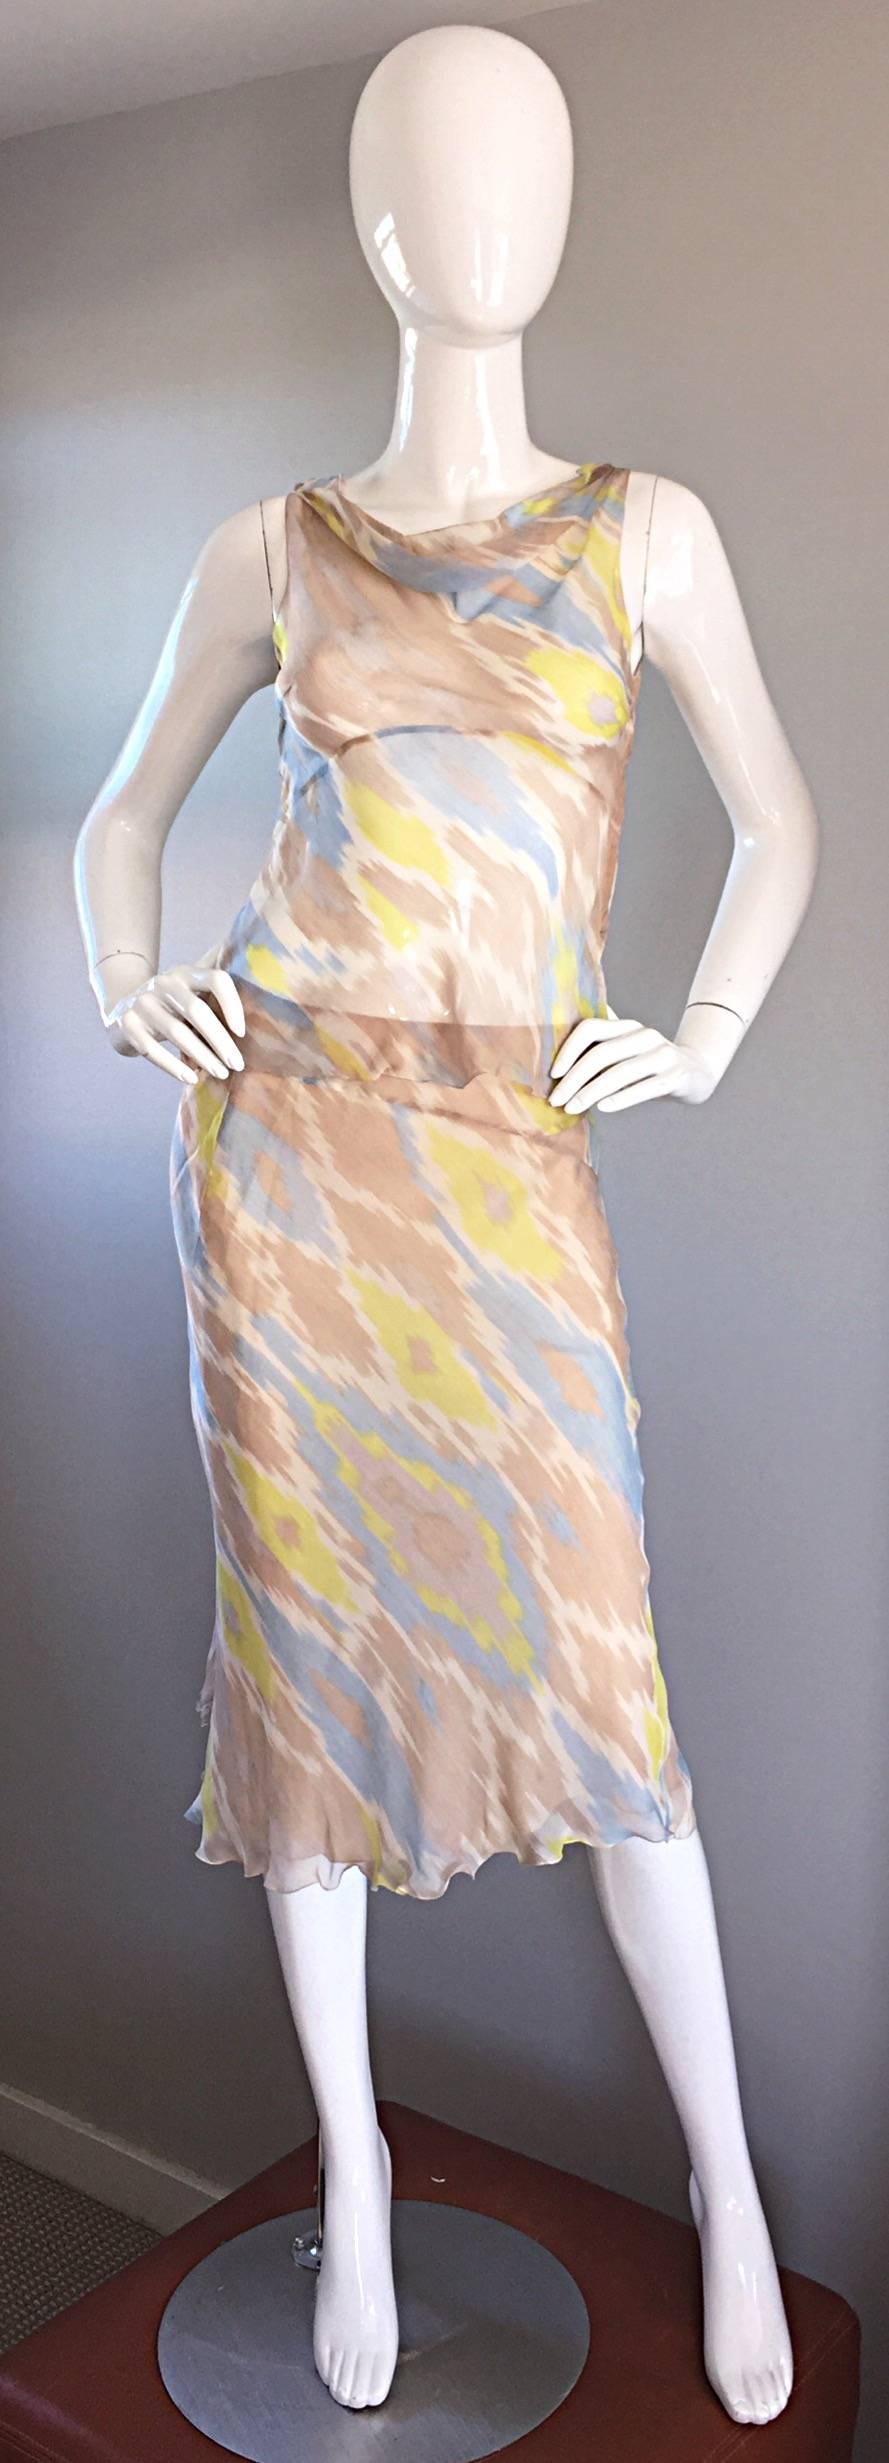 Striking 1990s ALBERTA FERRETTI dress set! Beautiful Ikat print in blue, yellow, ivory and nude, on the finest silk chiffon. Semi sheer Grecian style blouse that plunges in the back. Layers of silk under the flowy skirt. Snaps closure at side of